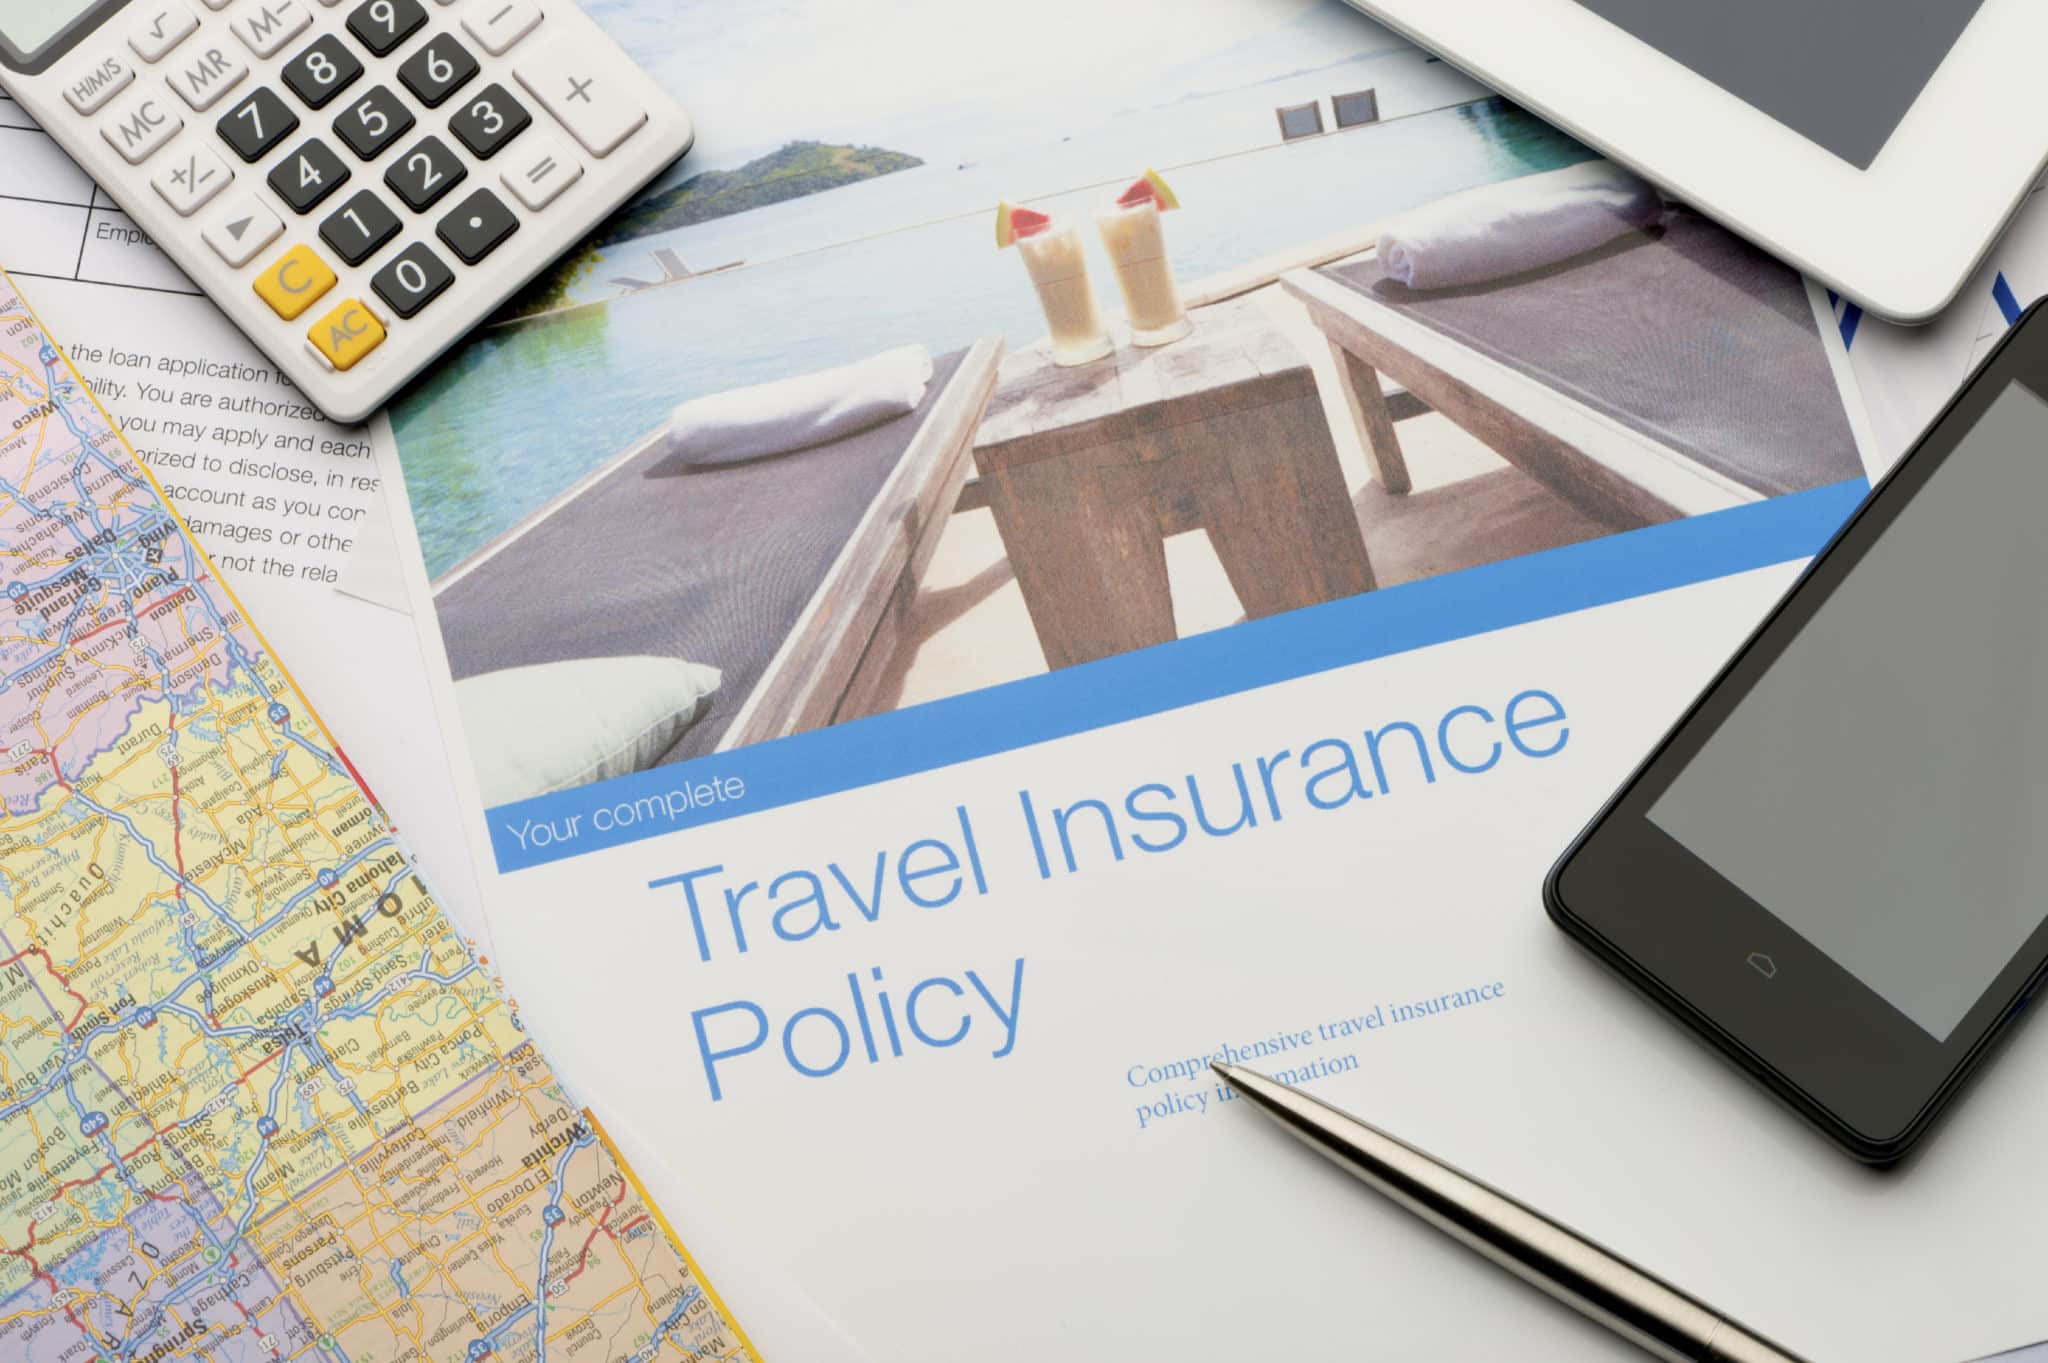 Travel insurance policy document with paperwork and technology. There is an image of a tourist resort with cocktails and a swimming pool which adds to the peace of mind concept. There is also a mobile phone, map, digital tablet and calculator. Image featured on the brochure can be found in my portfolio 20943516